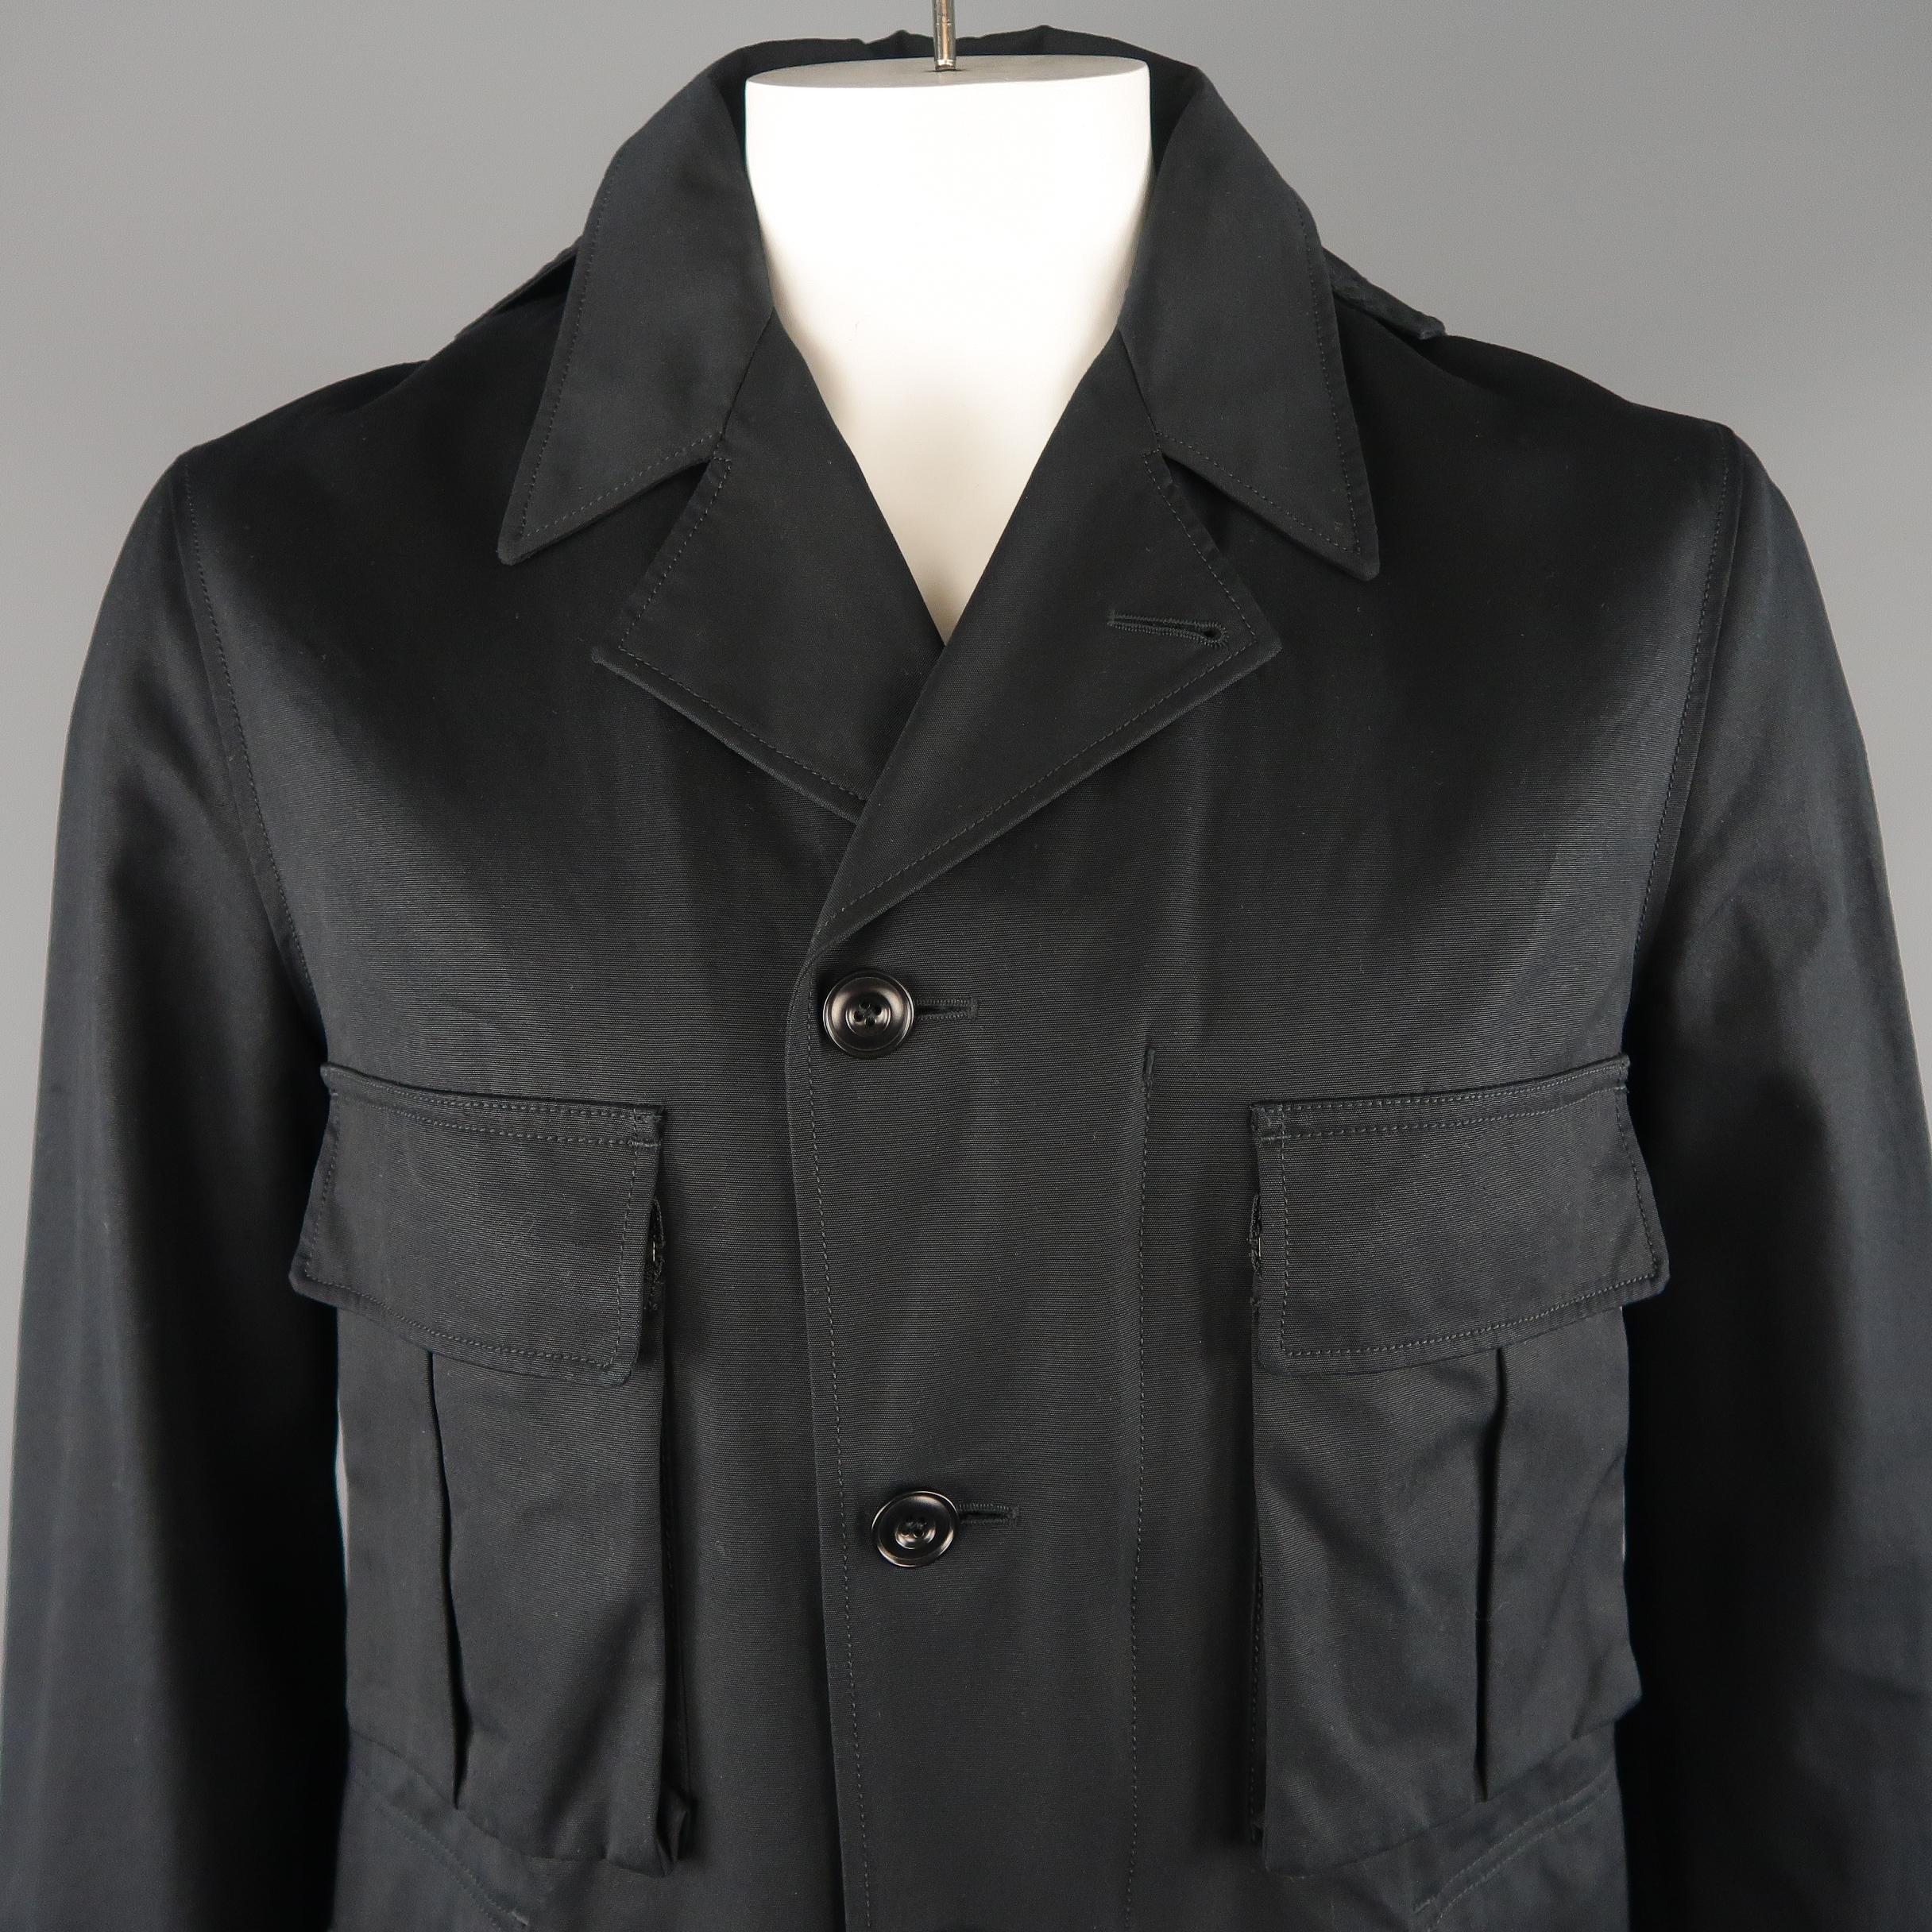 LEMAIRE coat comes in a navy tone in a solid cotton material lined with wool, with a ball collar, detachable hood, cargo and flap pockets, buttoned. Made in Romania.
 
Excellent Pre-Owned Condition.
Marked: 48
 
Measurements:
 
Shoulder: 18.5